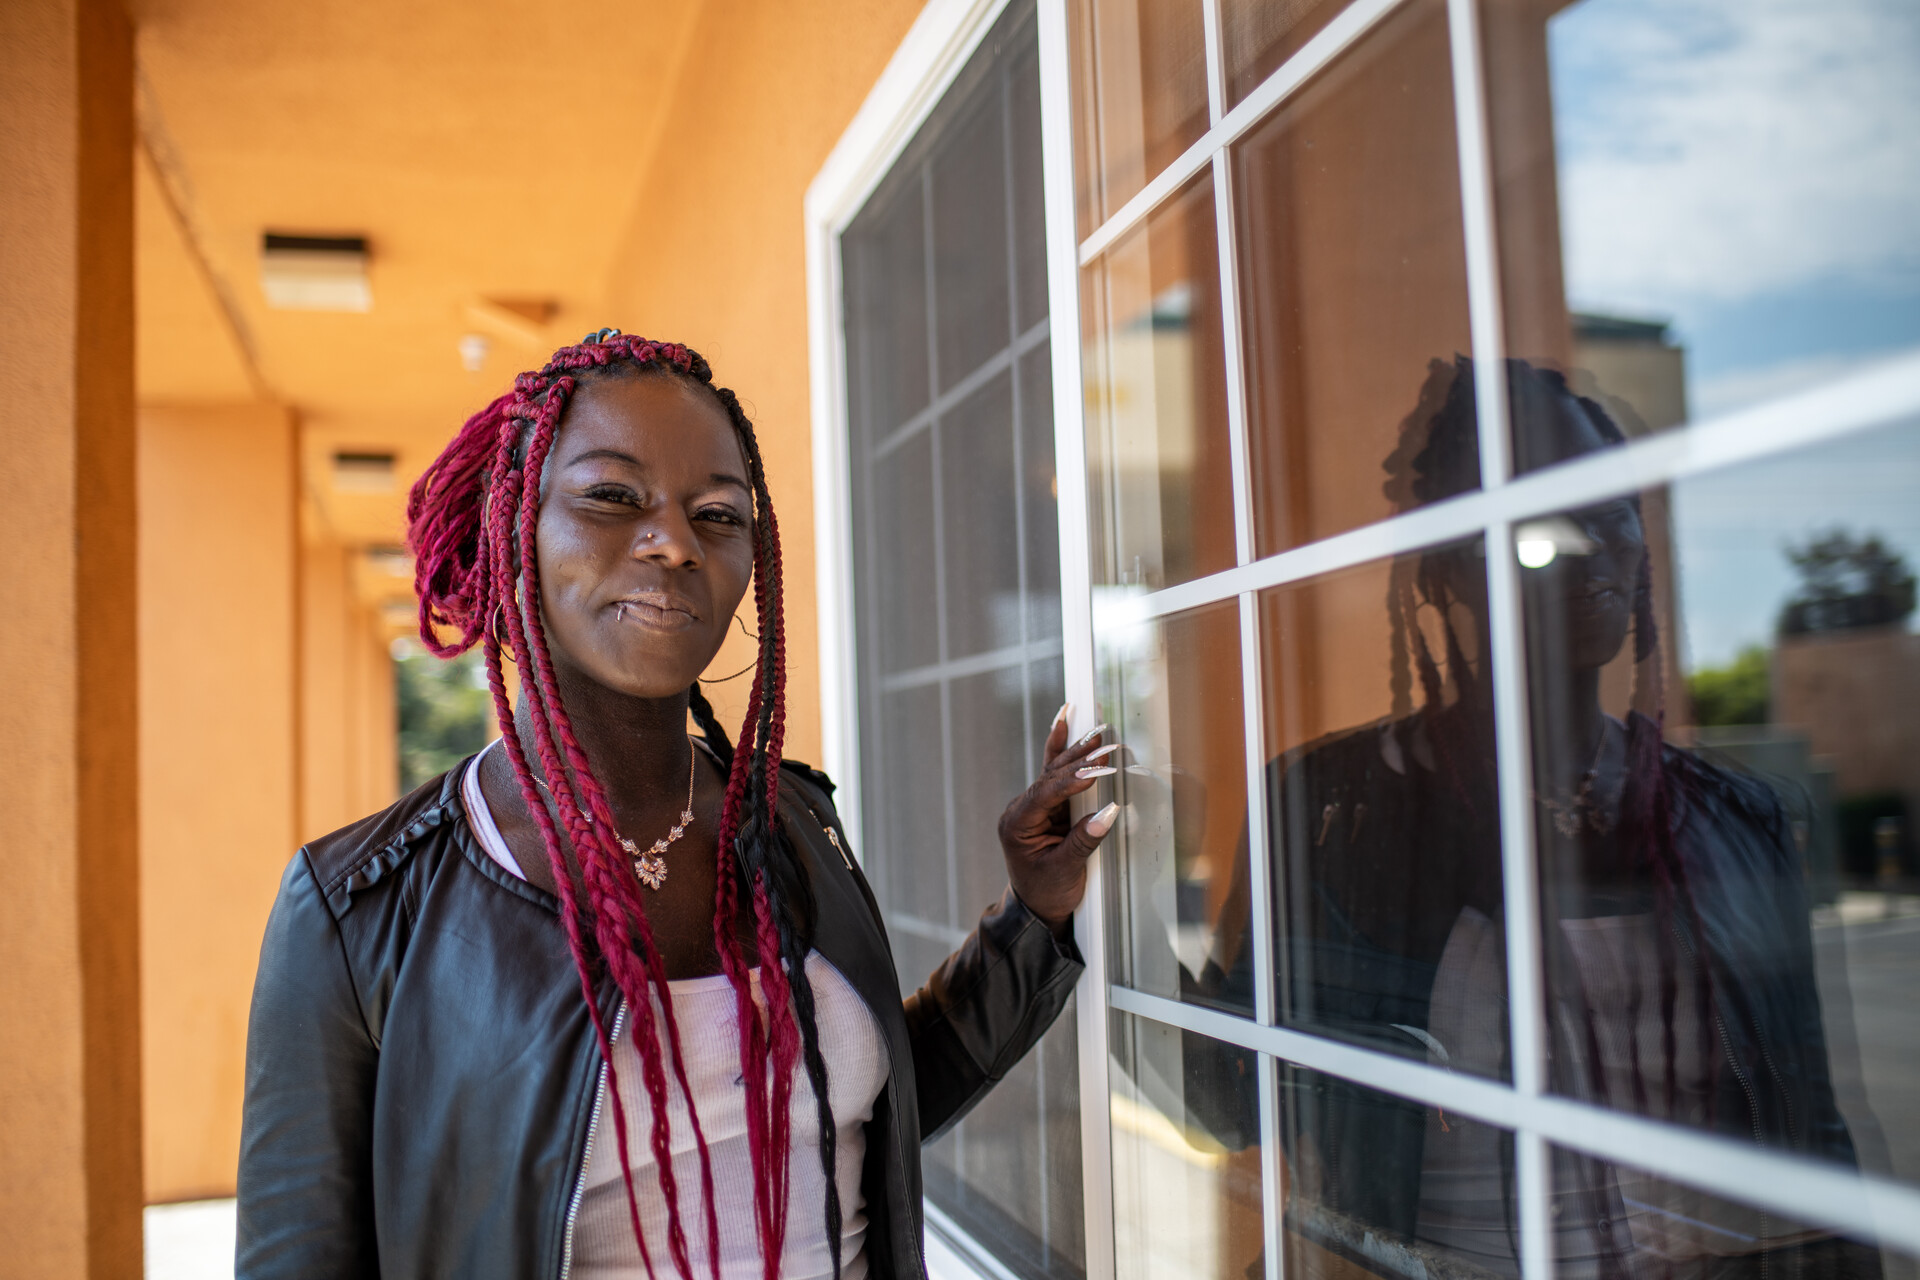 A smiling Black woman with bright red braids stands against a window and the yellow wall of a hotel.